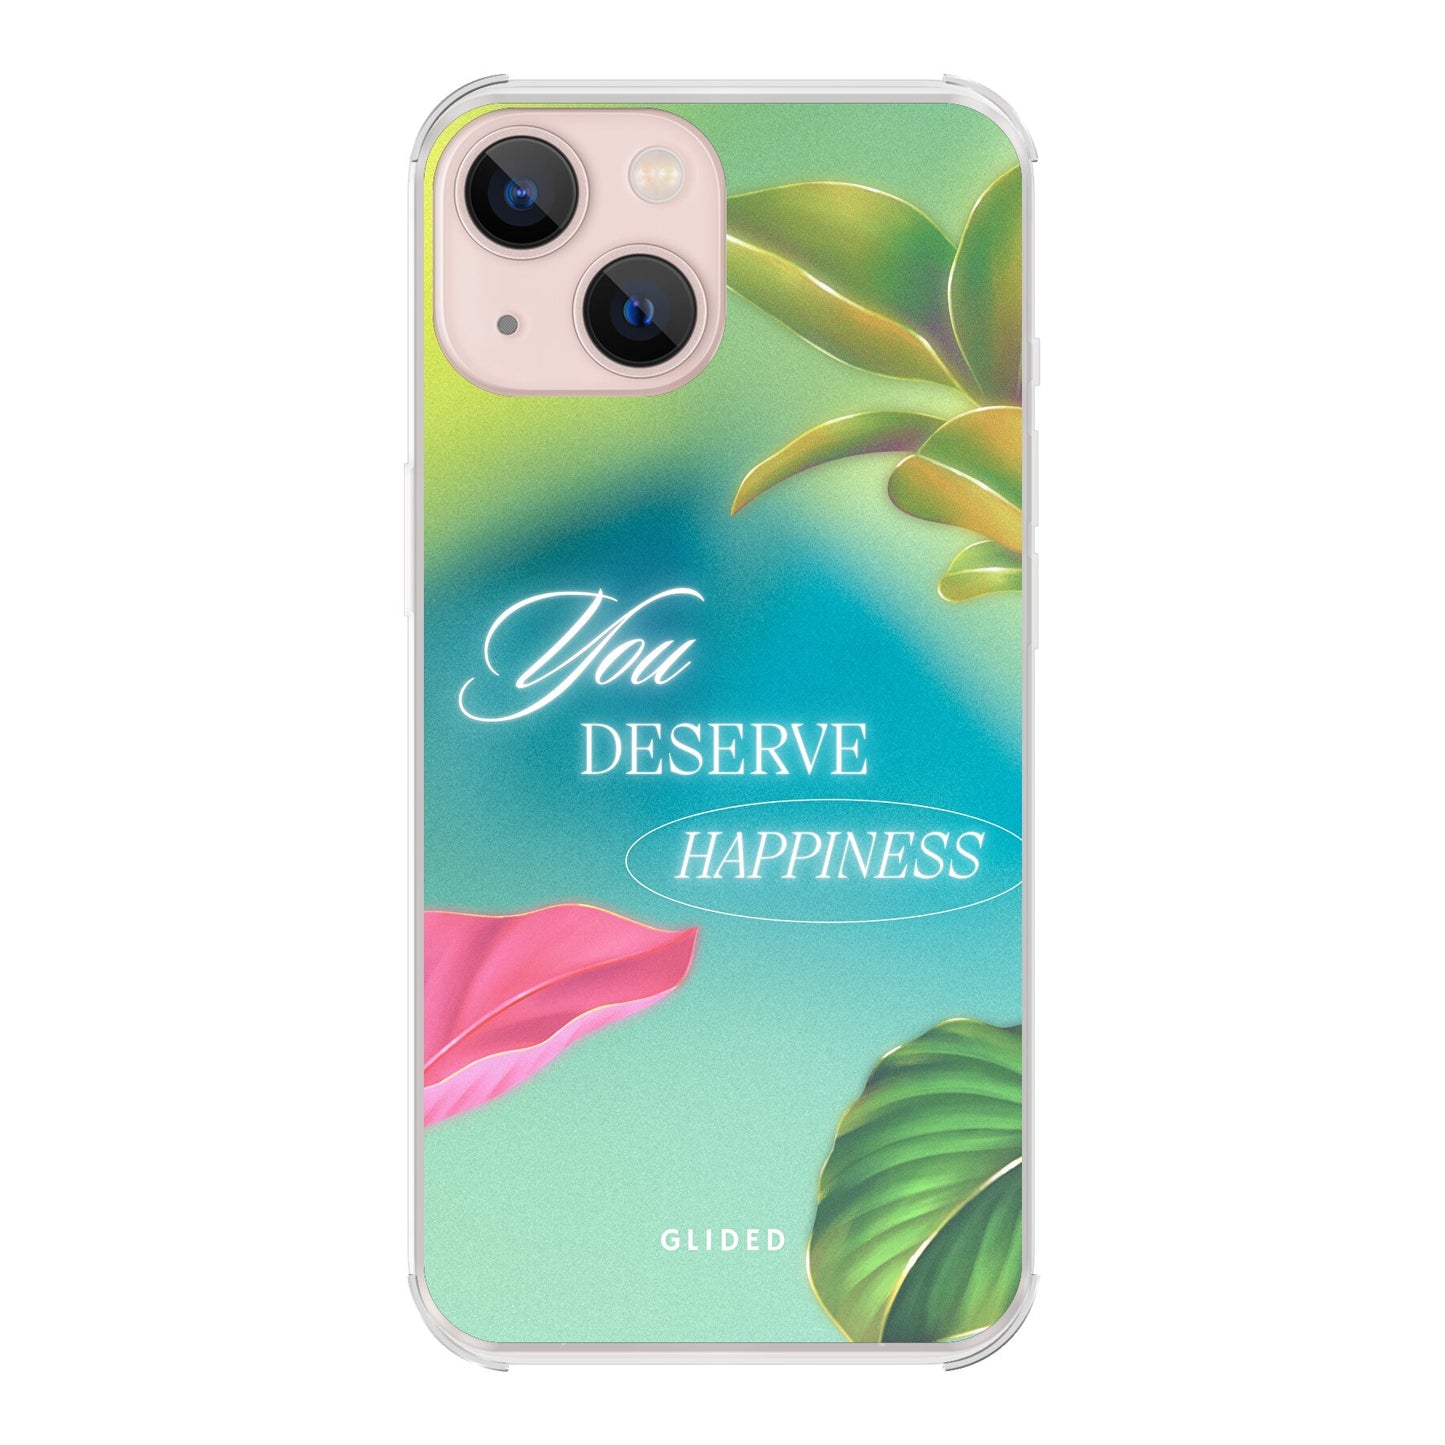 Happiness - iPhone 13 - Bumper case